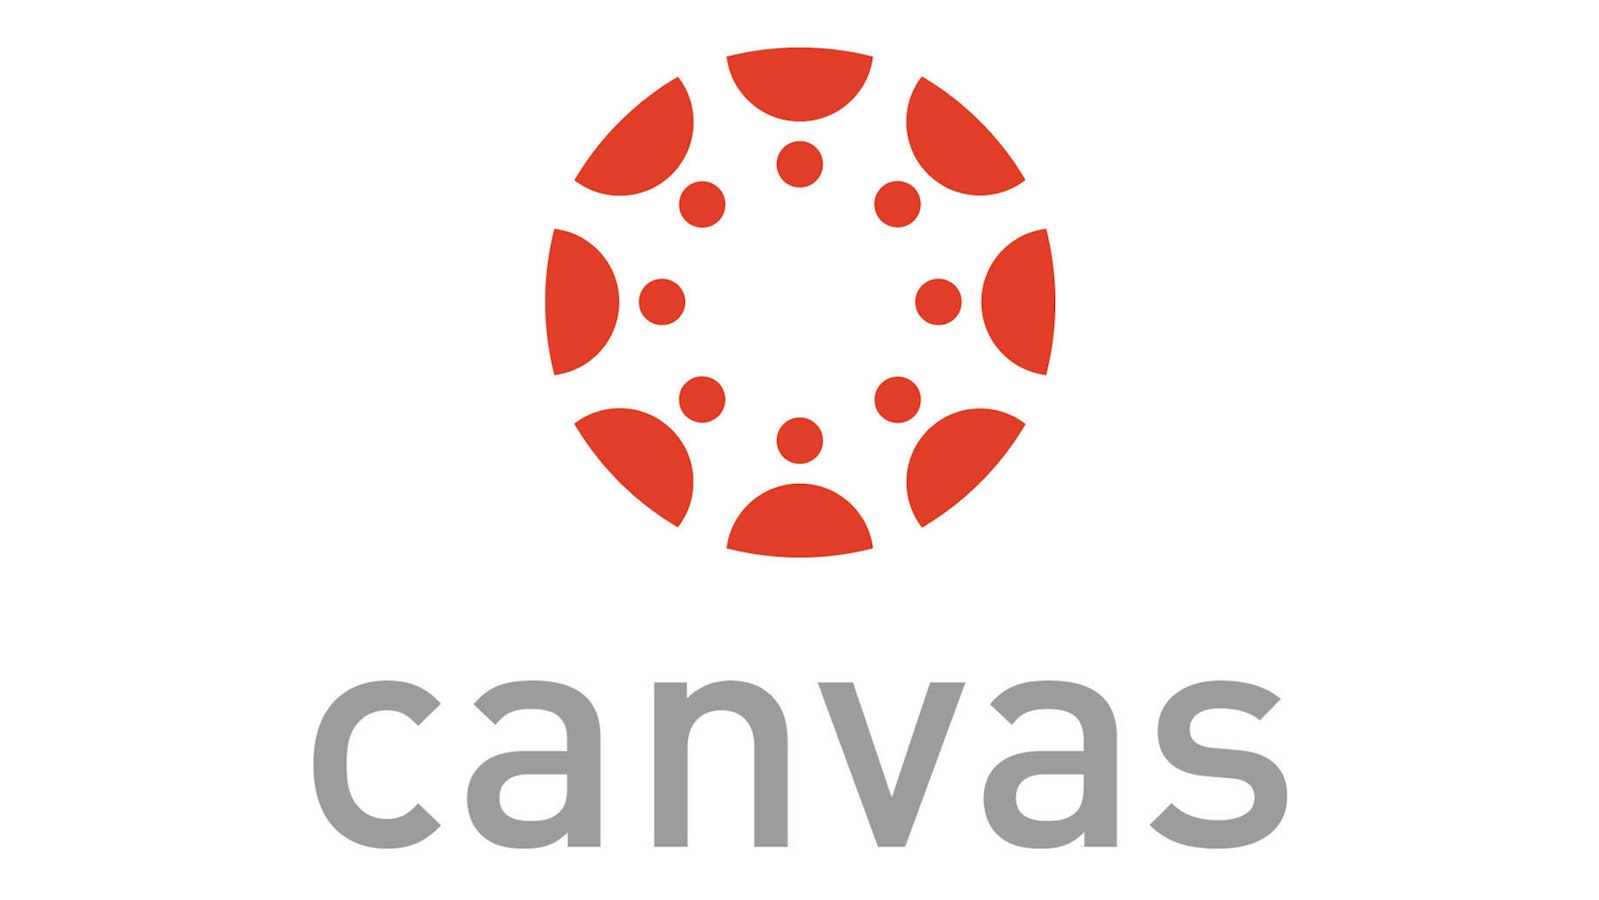 how to set up an extra credit assignment in canvas